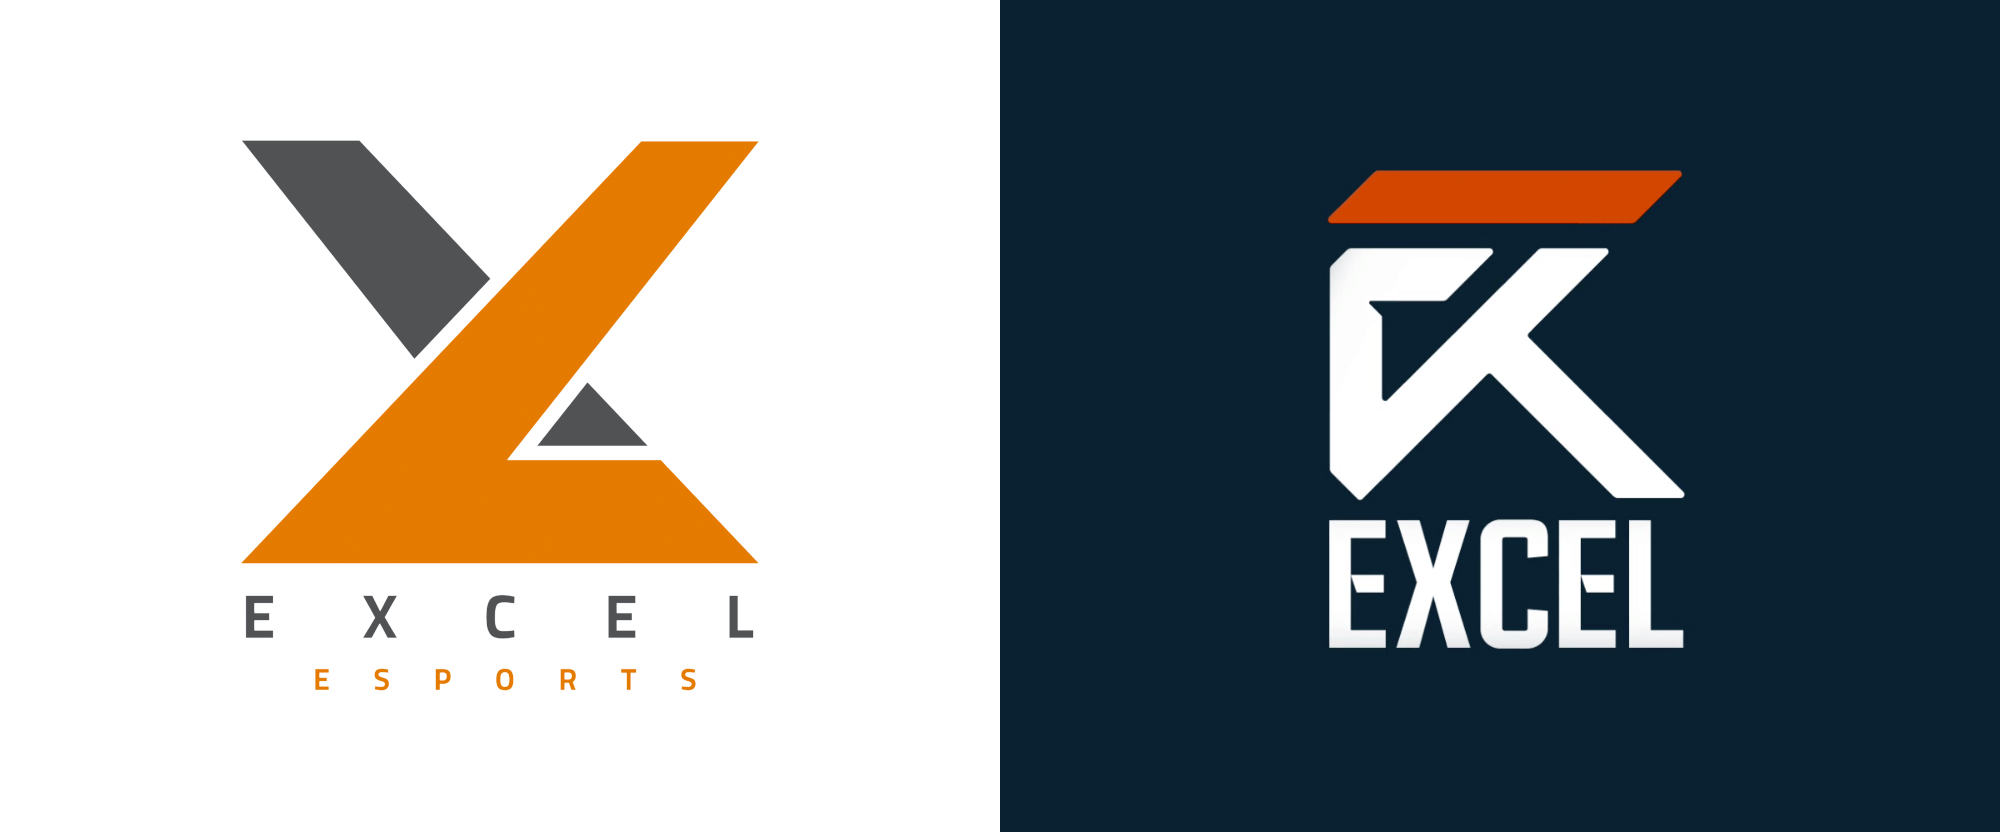 New Logo and Identity for exceL Esports by LoveGunn